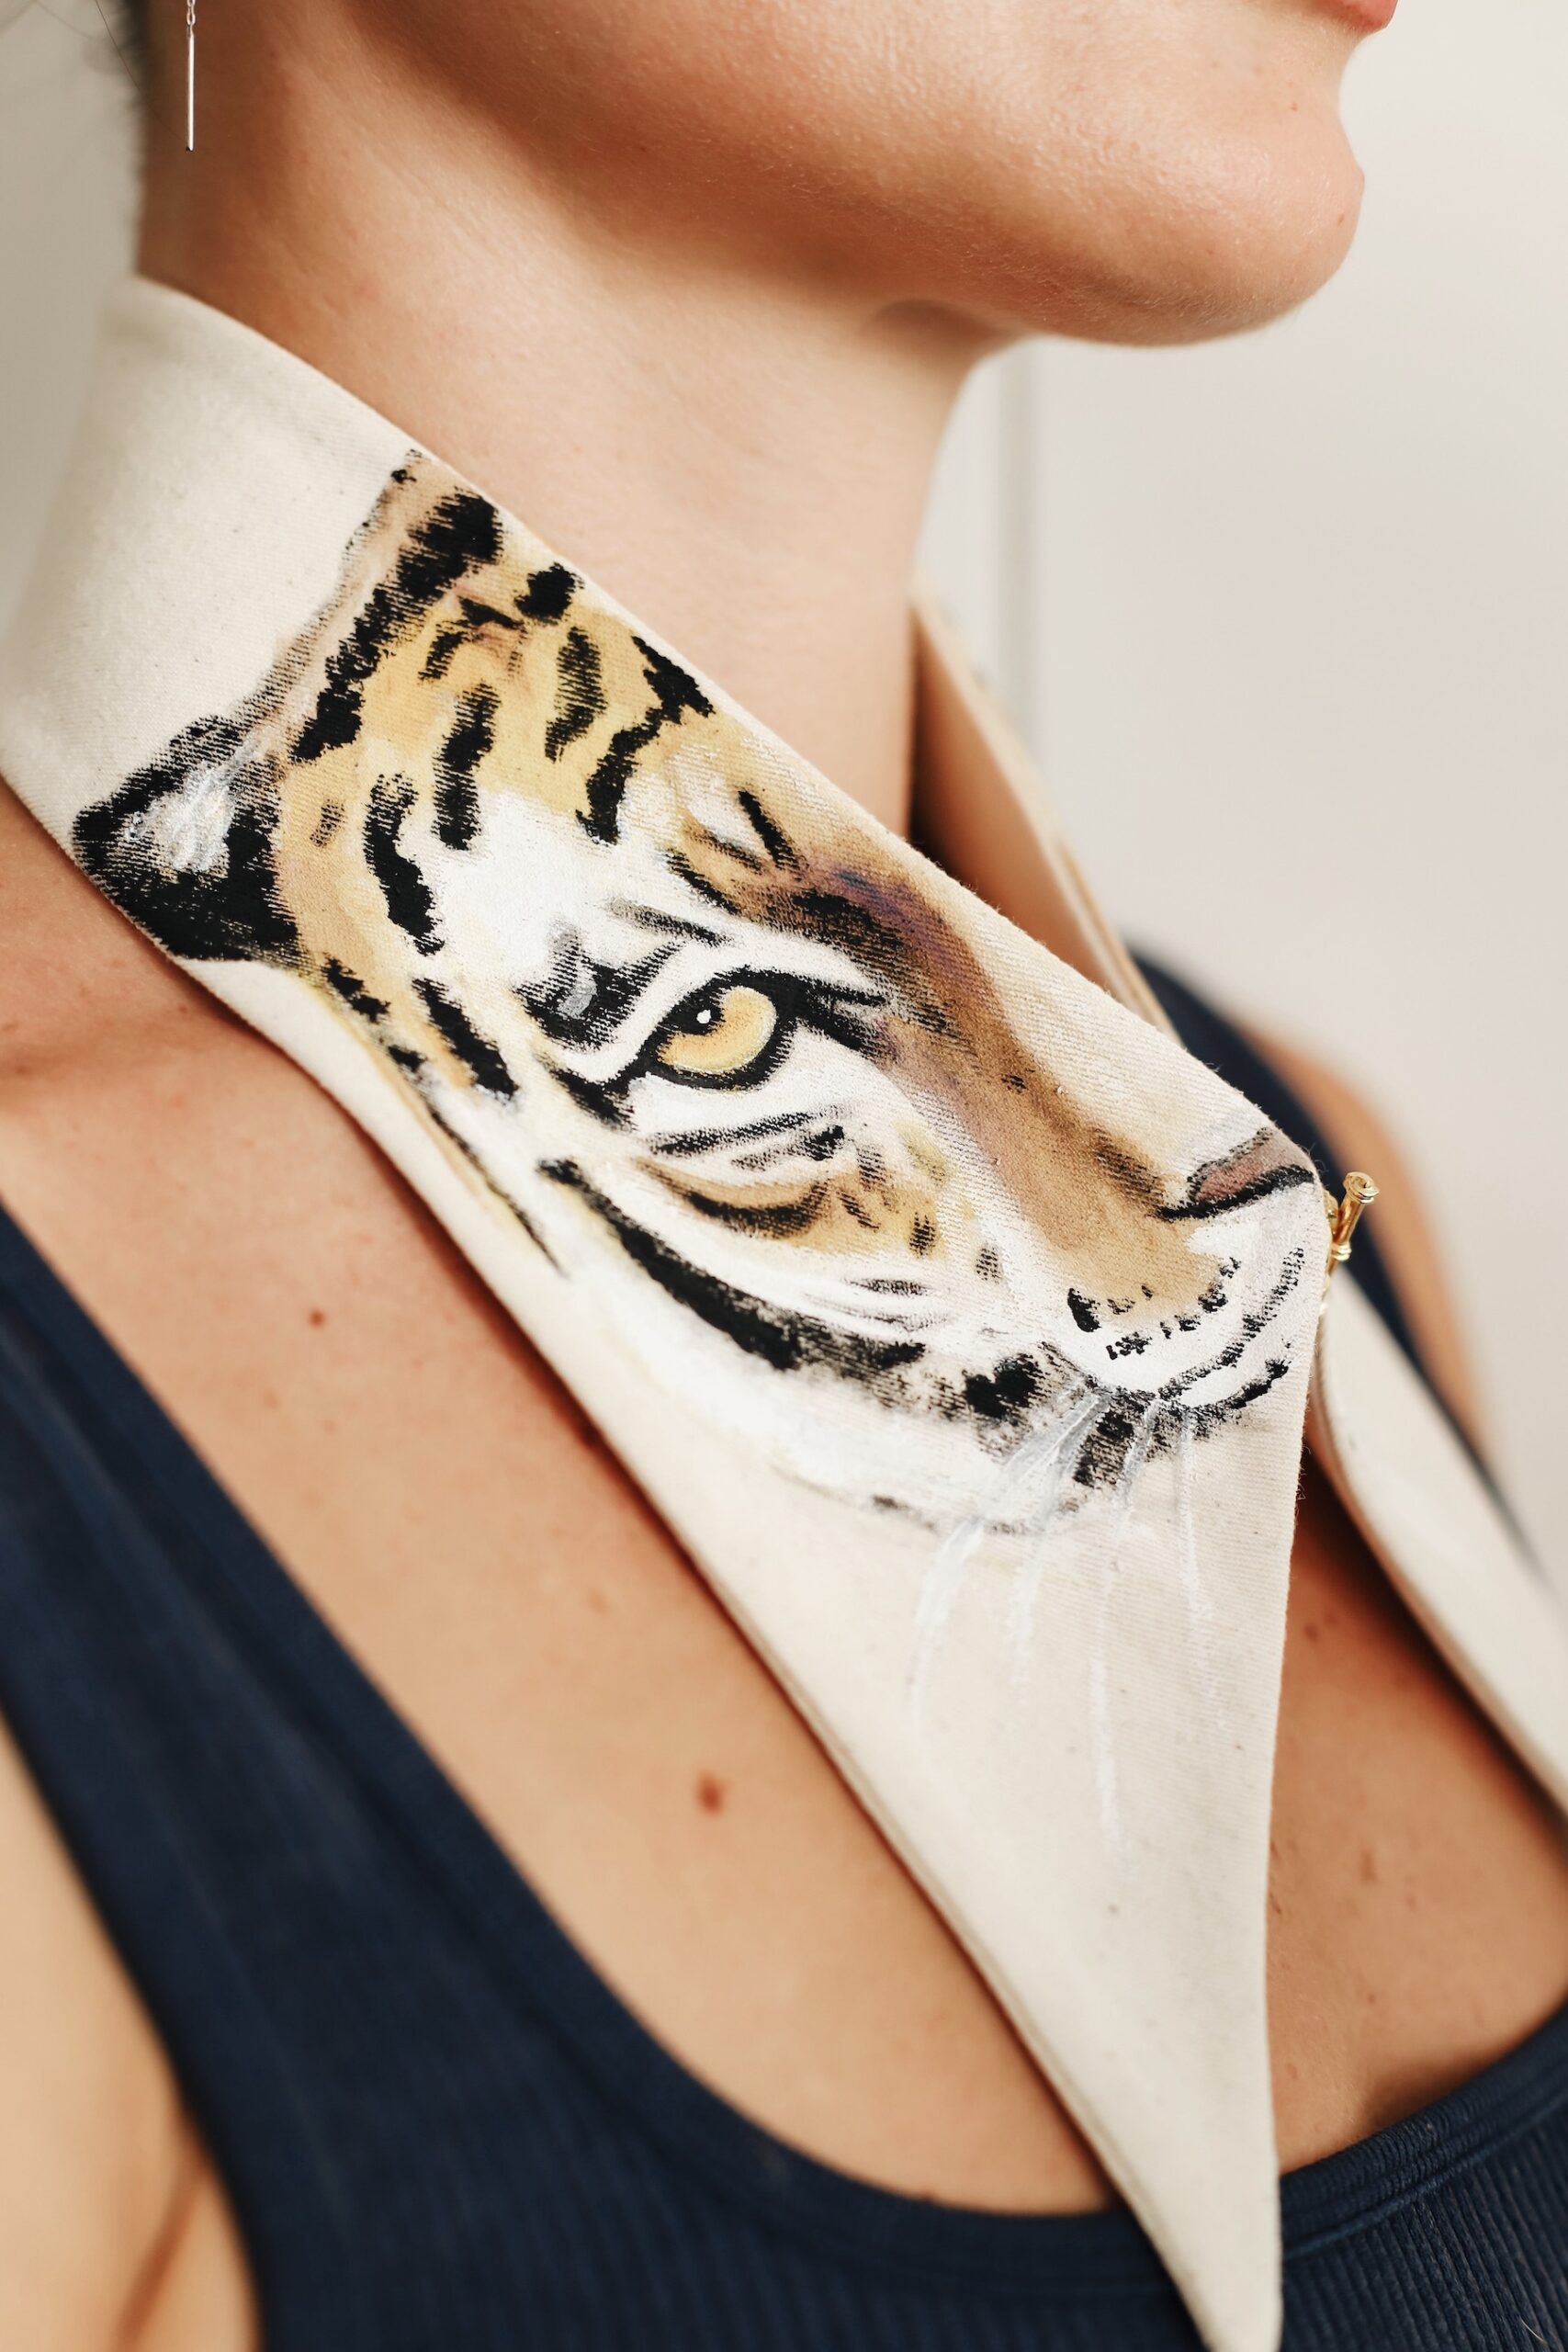 LongJudgeTiger designed by painting artist. It is an art accessory with animal figure pattern organic cotton